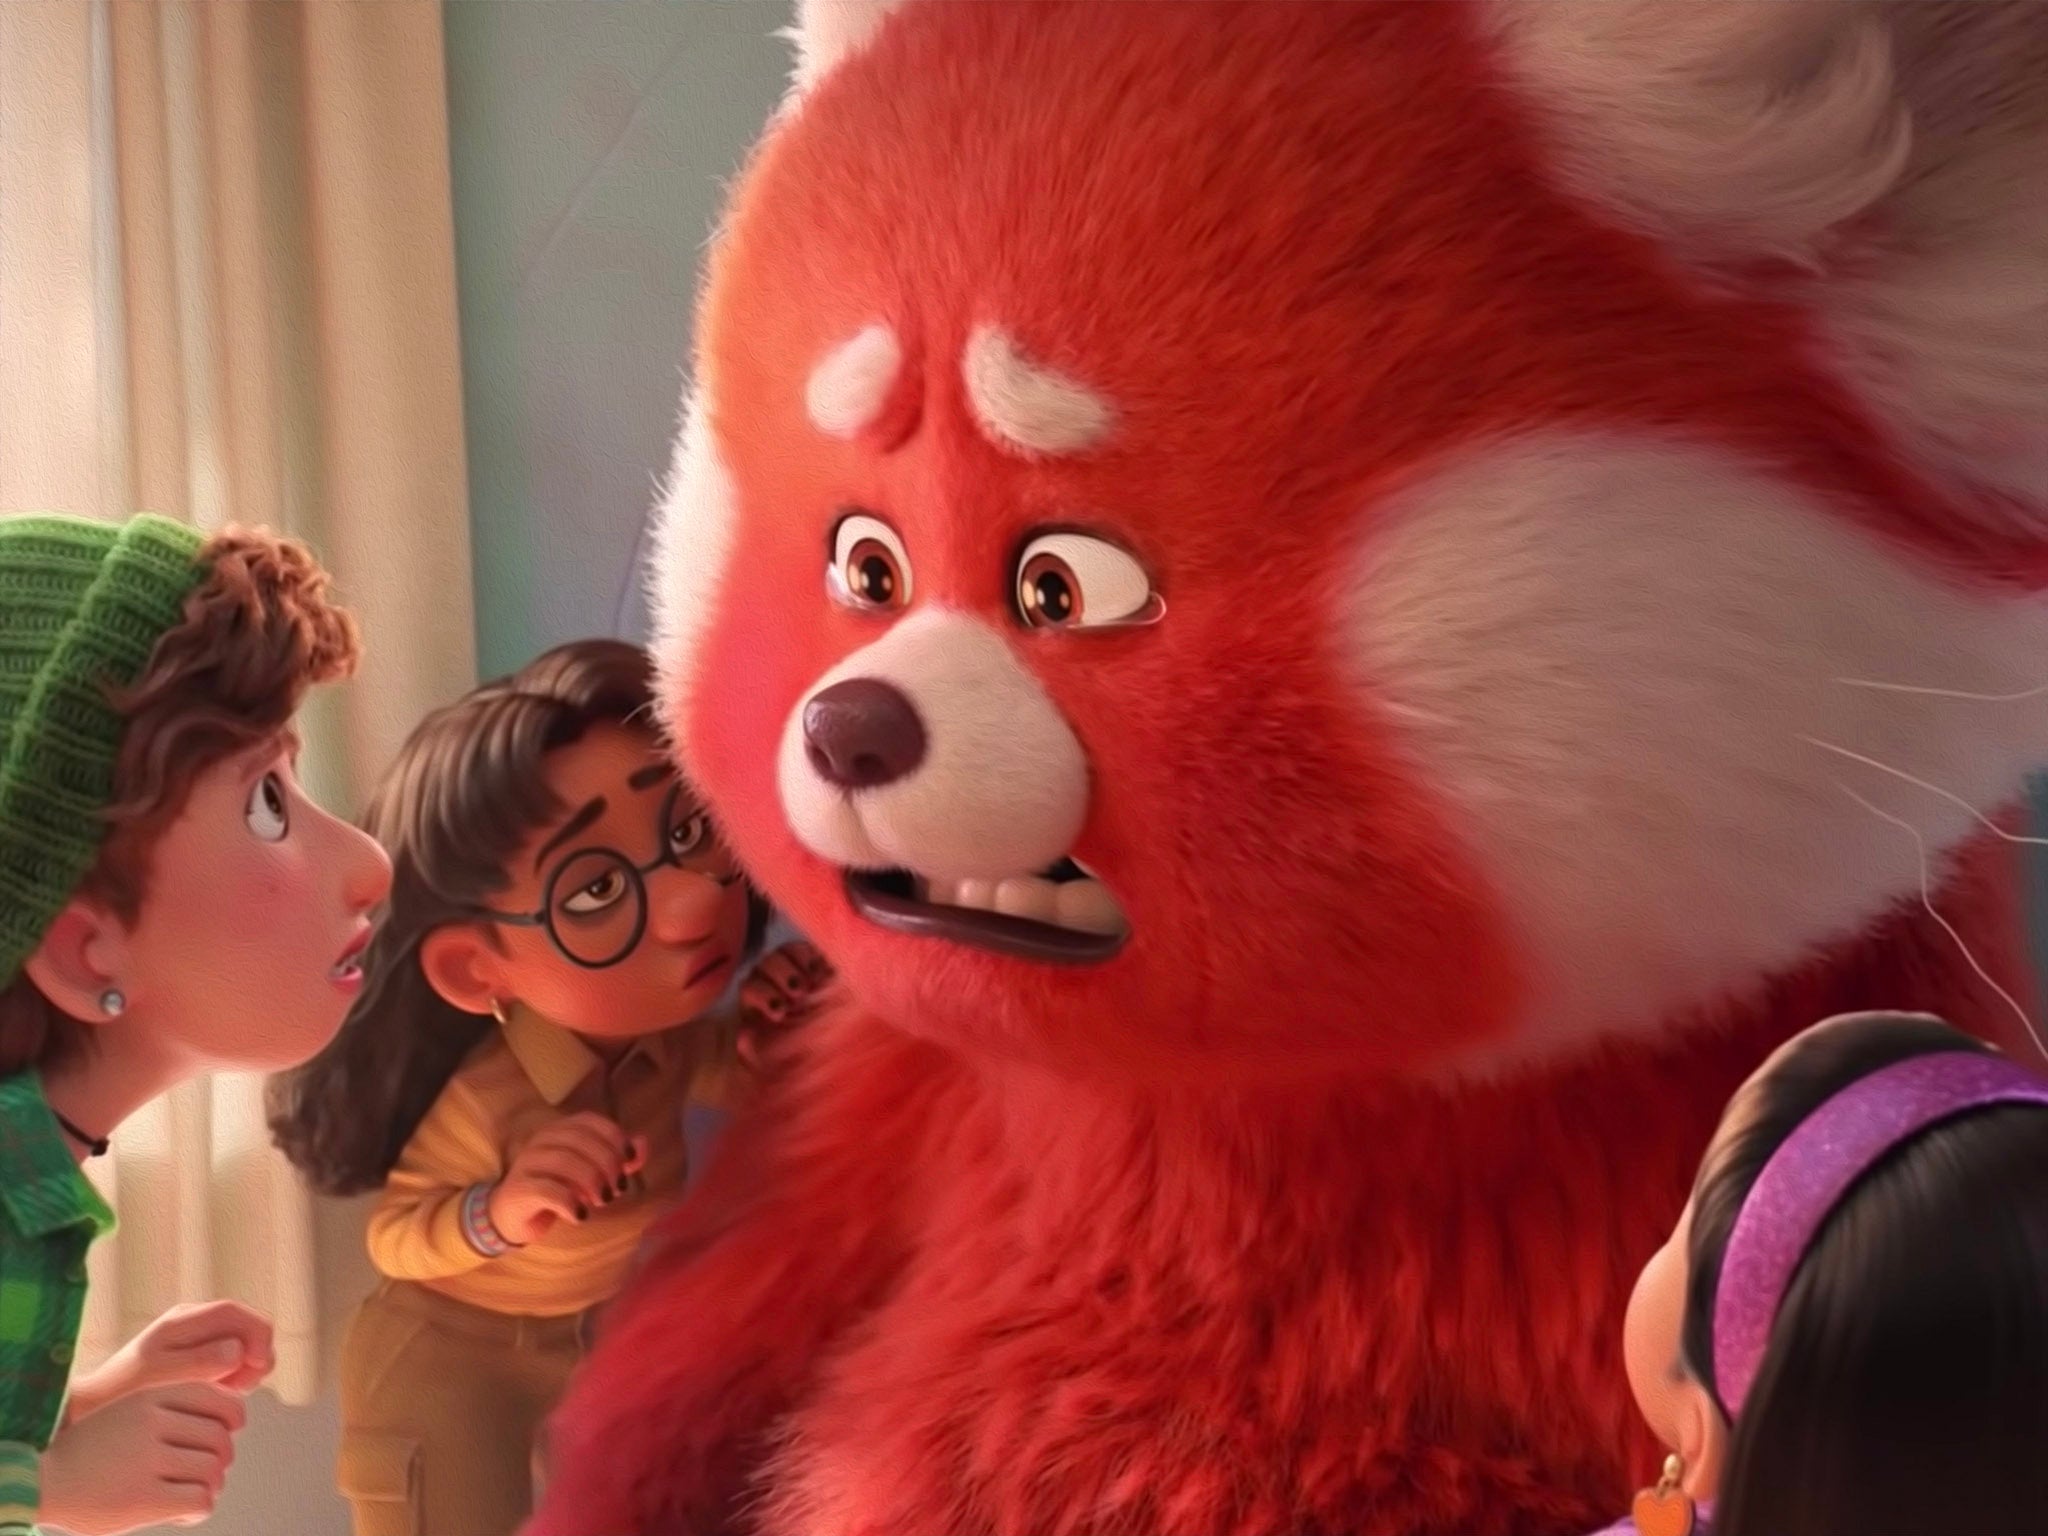 Pixar's Turning Red Review: You've Got a Friend in Mei